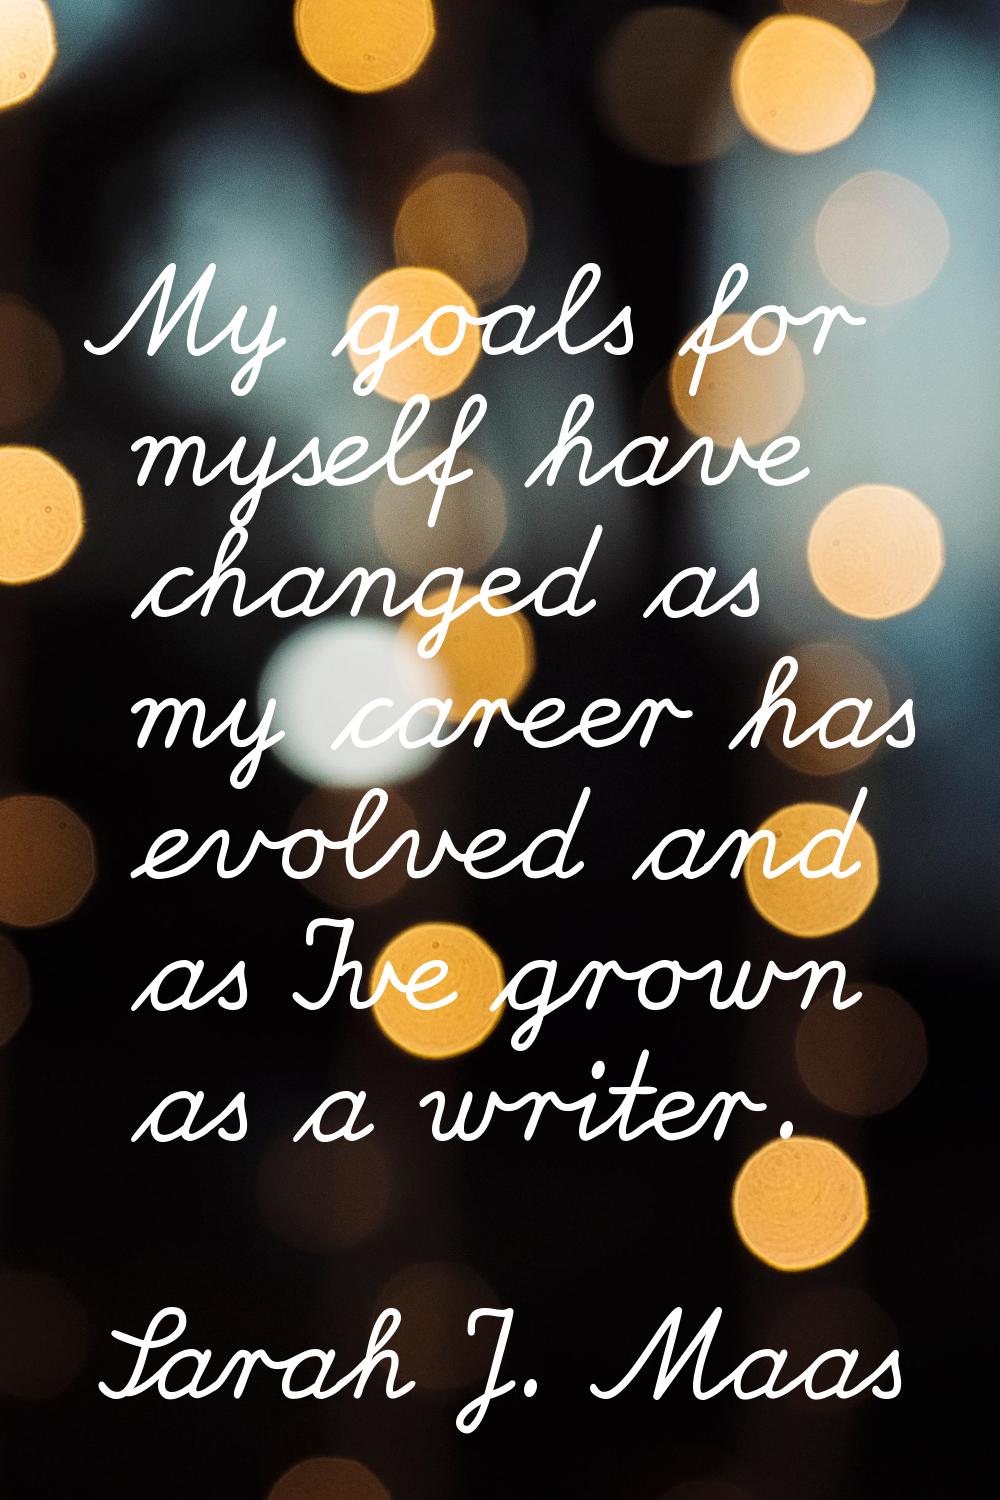 My goals for myself have changed as my career has evolved and as I've grown as a writer.